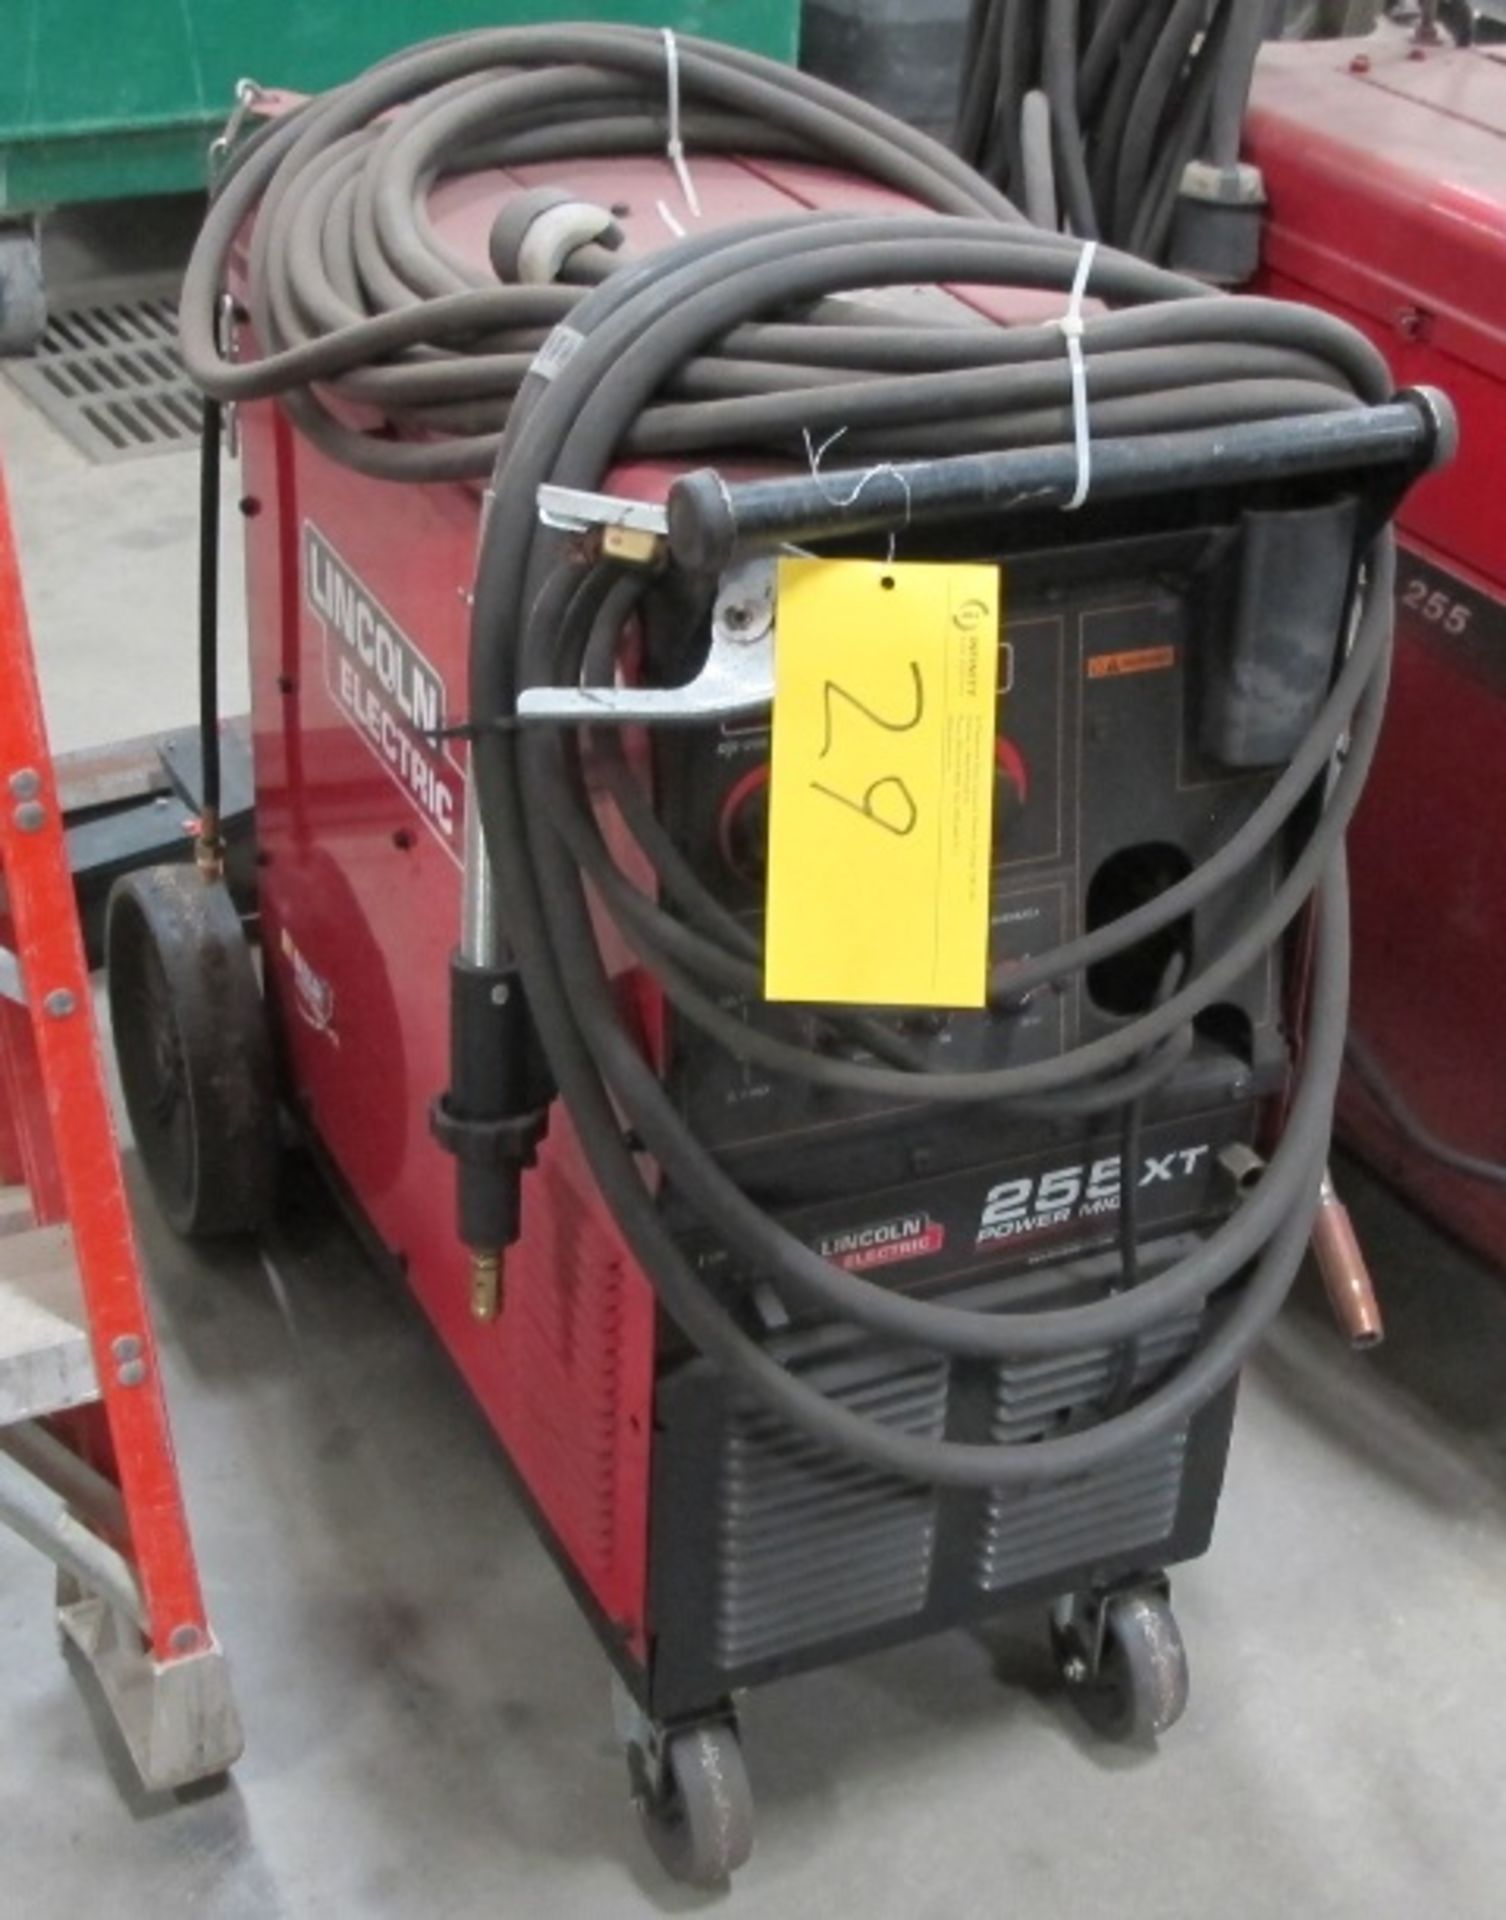 LINCOLN ELECTRIC POWER M19255 ELECTRIC WELDER, S/N 11520